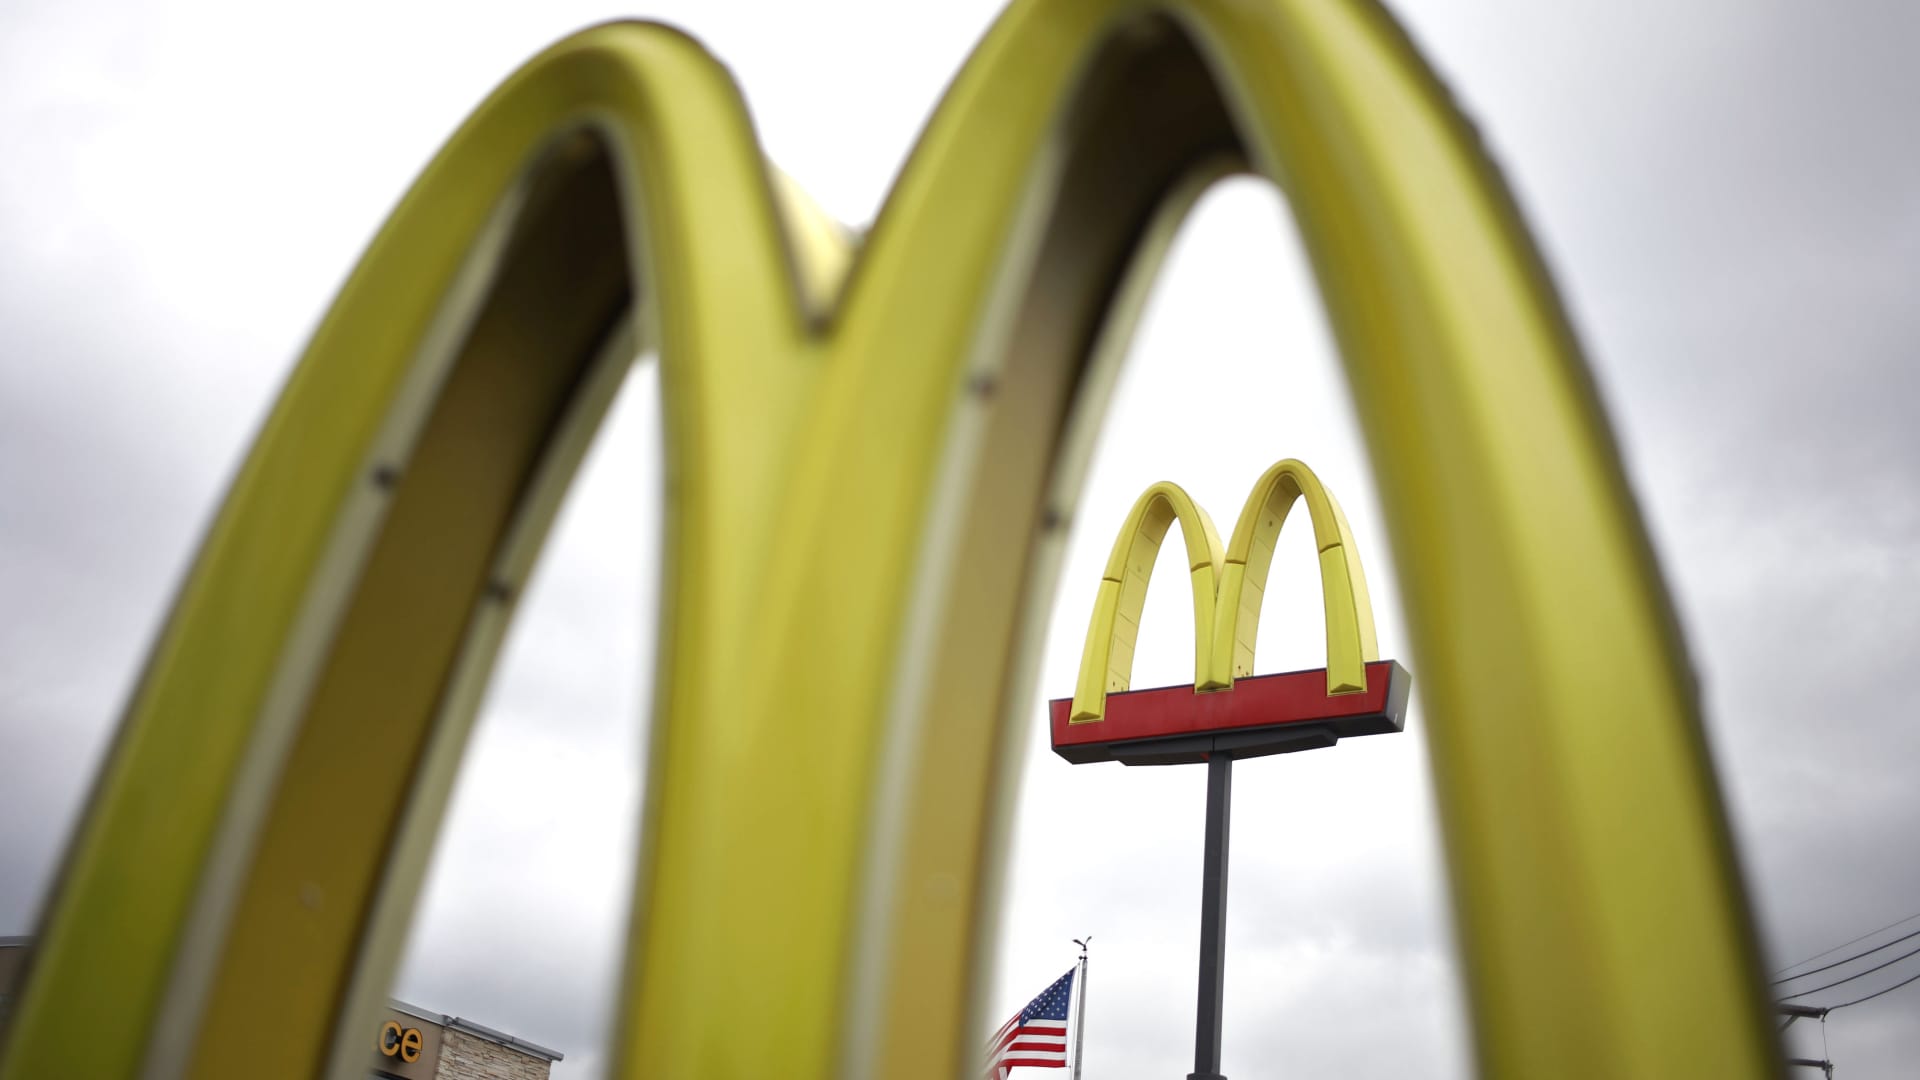 McDonald’s shareholders to vote on proxy fight with Carl Icahn over animal welfare practices